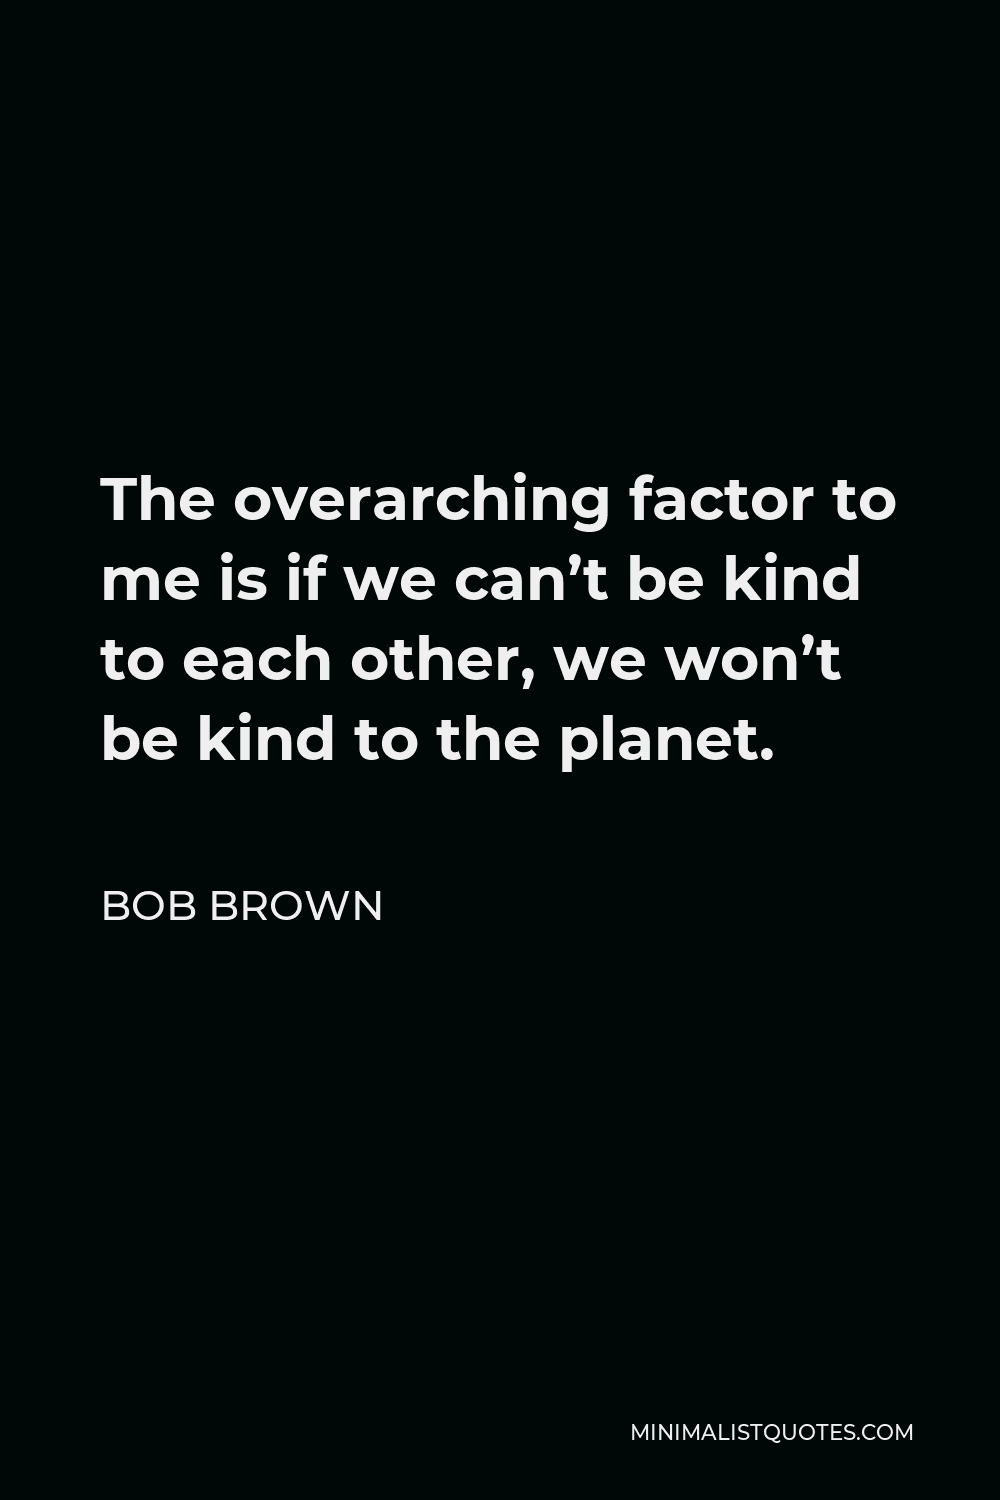 Bob Brown Quote - The overarching factor to me is if we can’t be kind to each other, we won’t be kind to the planet.